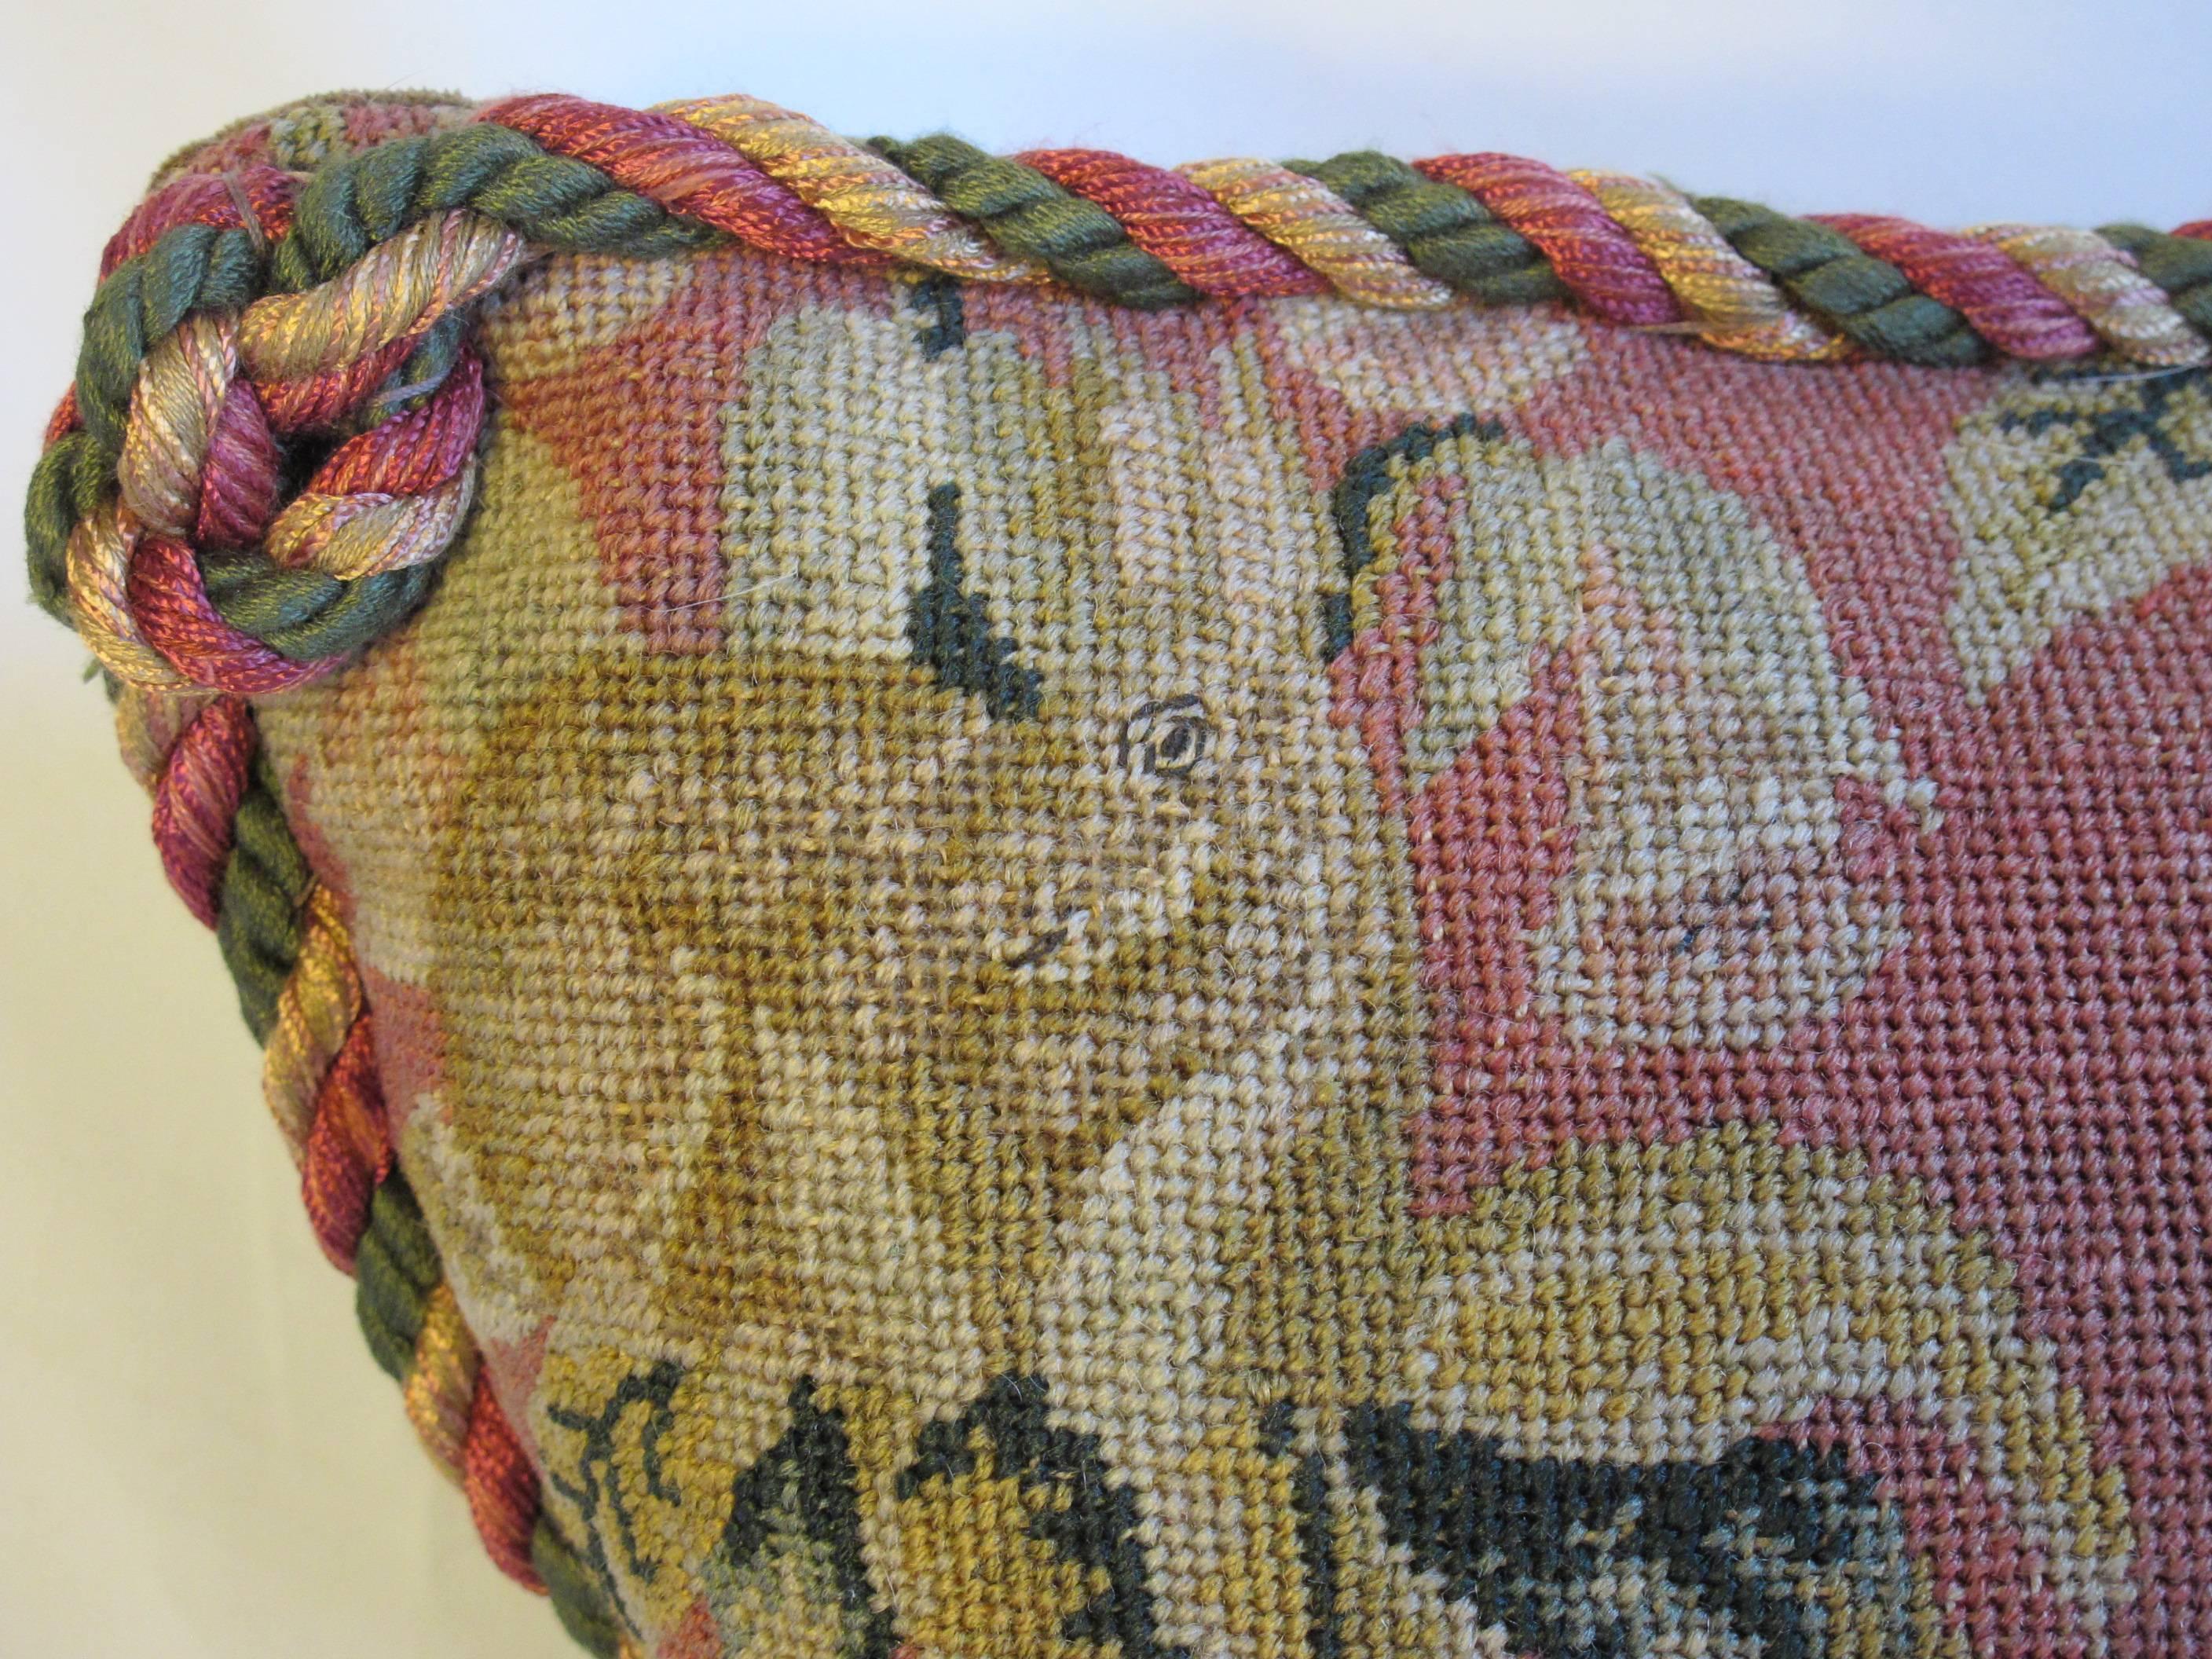 A pillow made from an early 20th century needlepoint depicting a charming woodland scene with foliage and small animals, embellished with hand-knotted cord trim, hidden zipper closure, down insert is included.